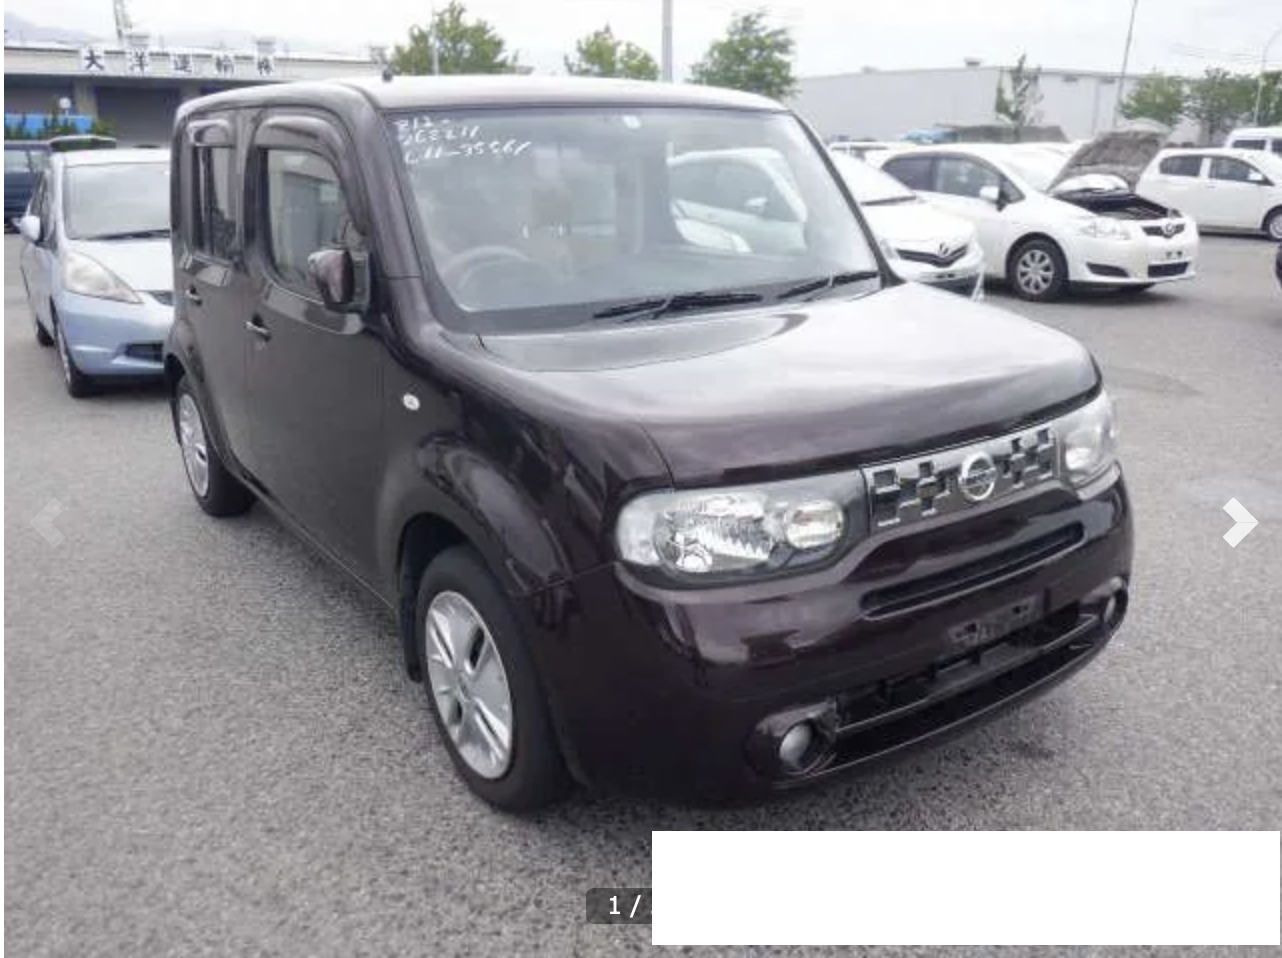 Nissan cube and nissan cubic supplied for sale fully UK registered direct from Japan with V5 and Mot, algys autos best value Nissan cube abd nissan cubic in UK, fact!